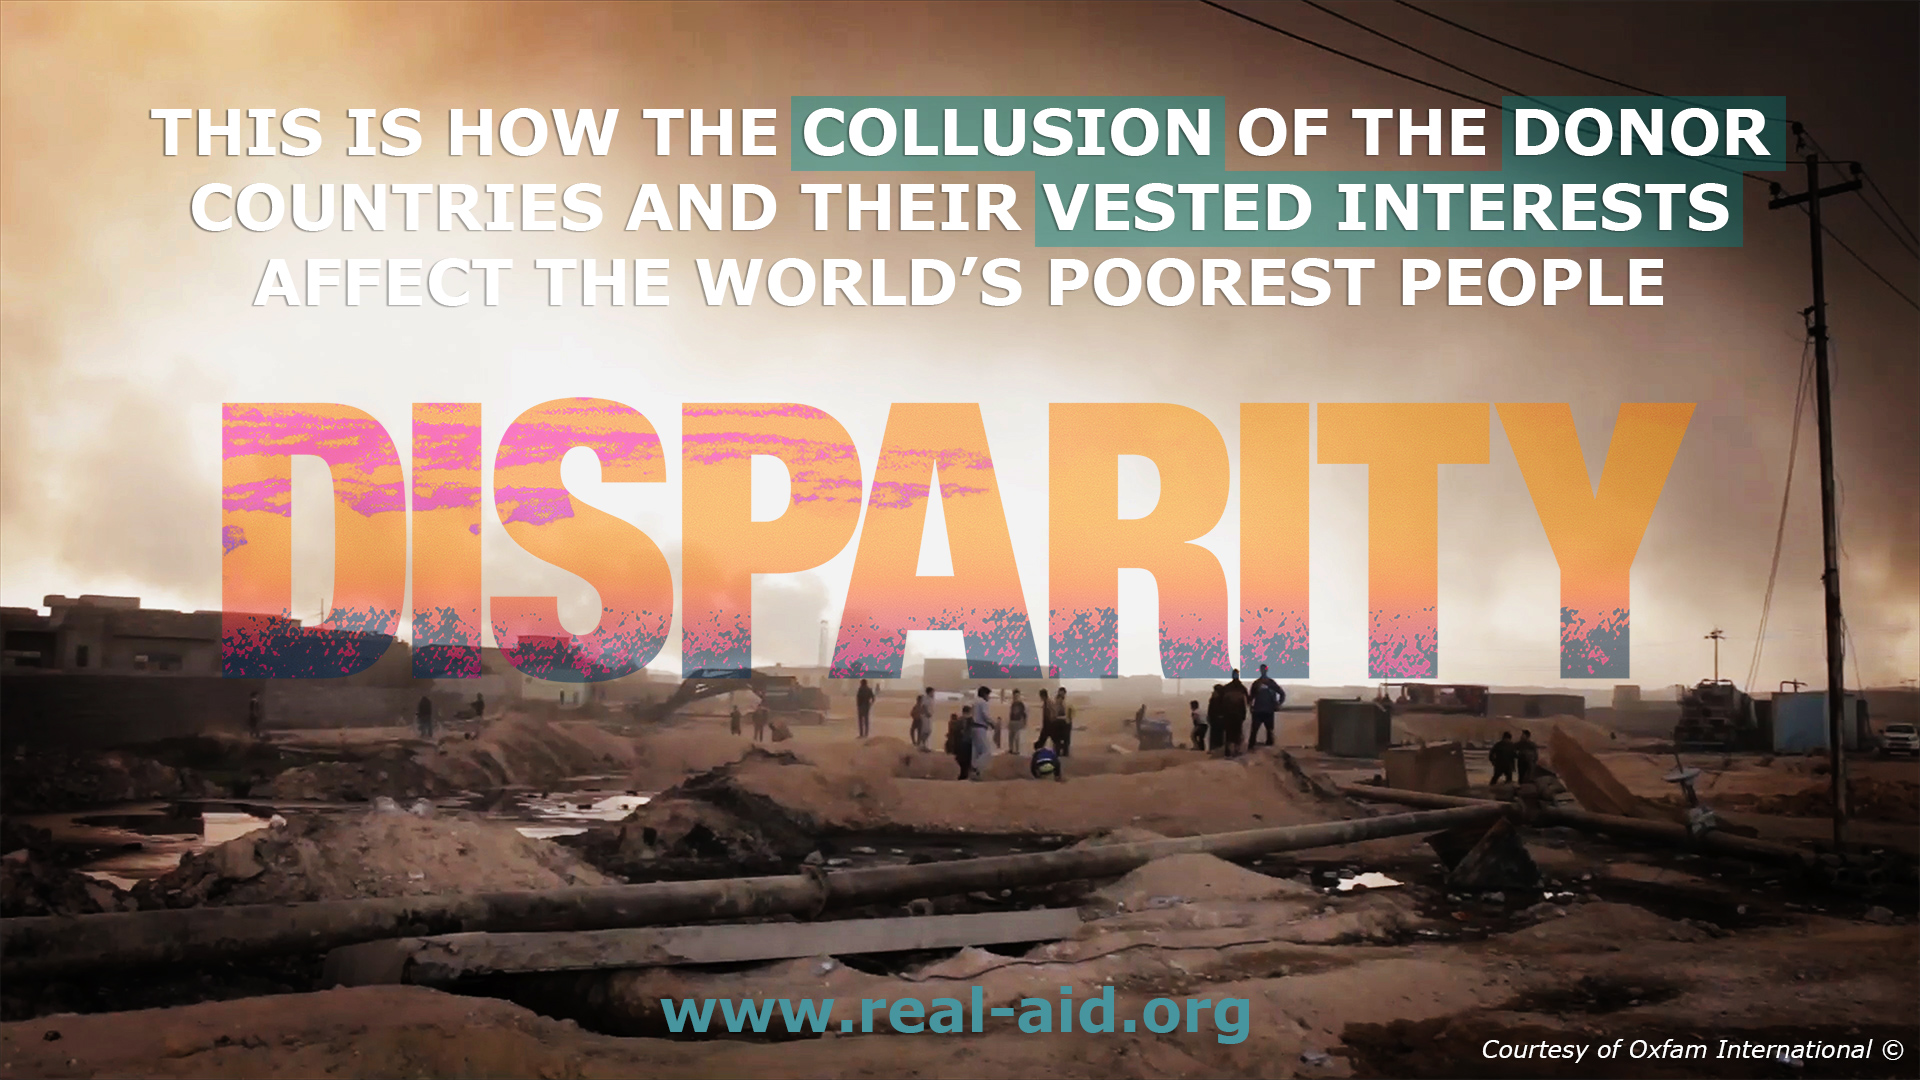 Disparity Film poster, collusion of donor countries and vested interests quote, desolate arid background